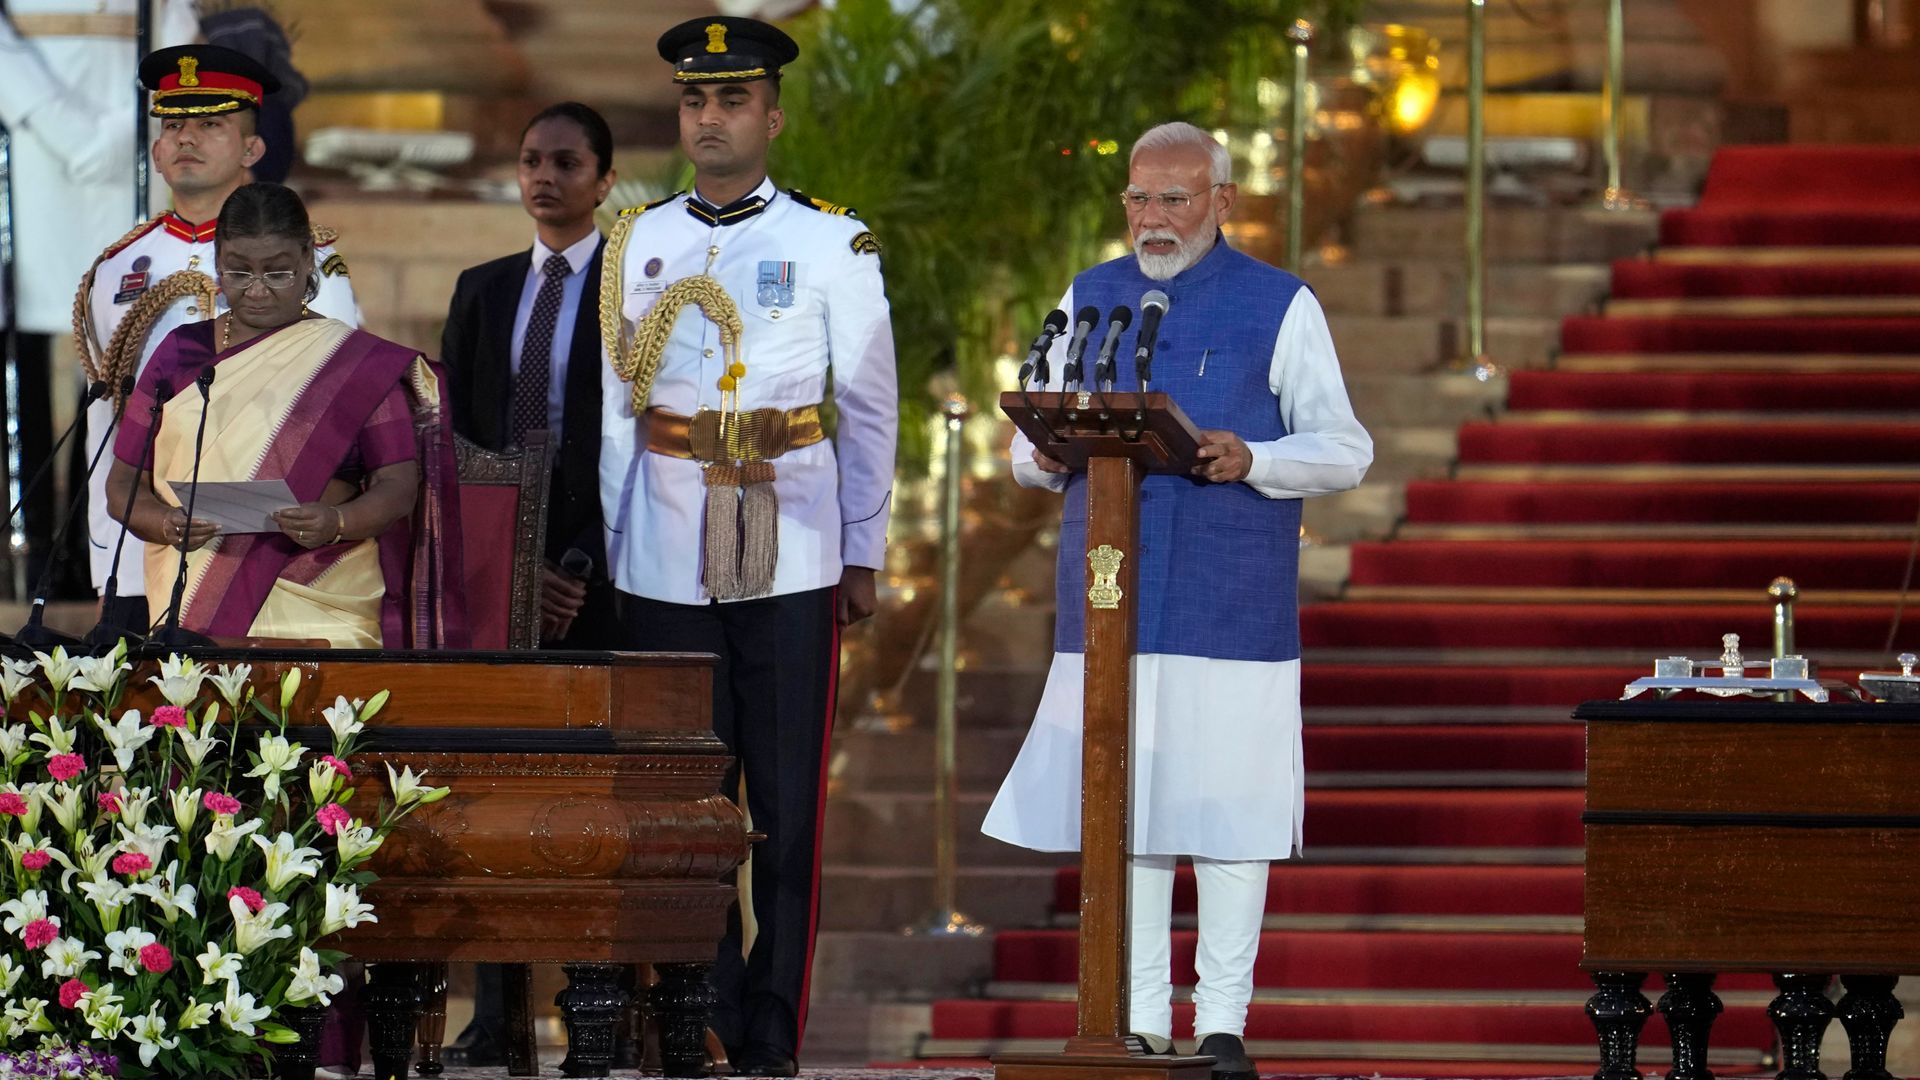 Even as India's Modi is sworn in as PM for third time, he is diminished